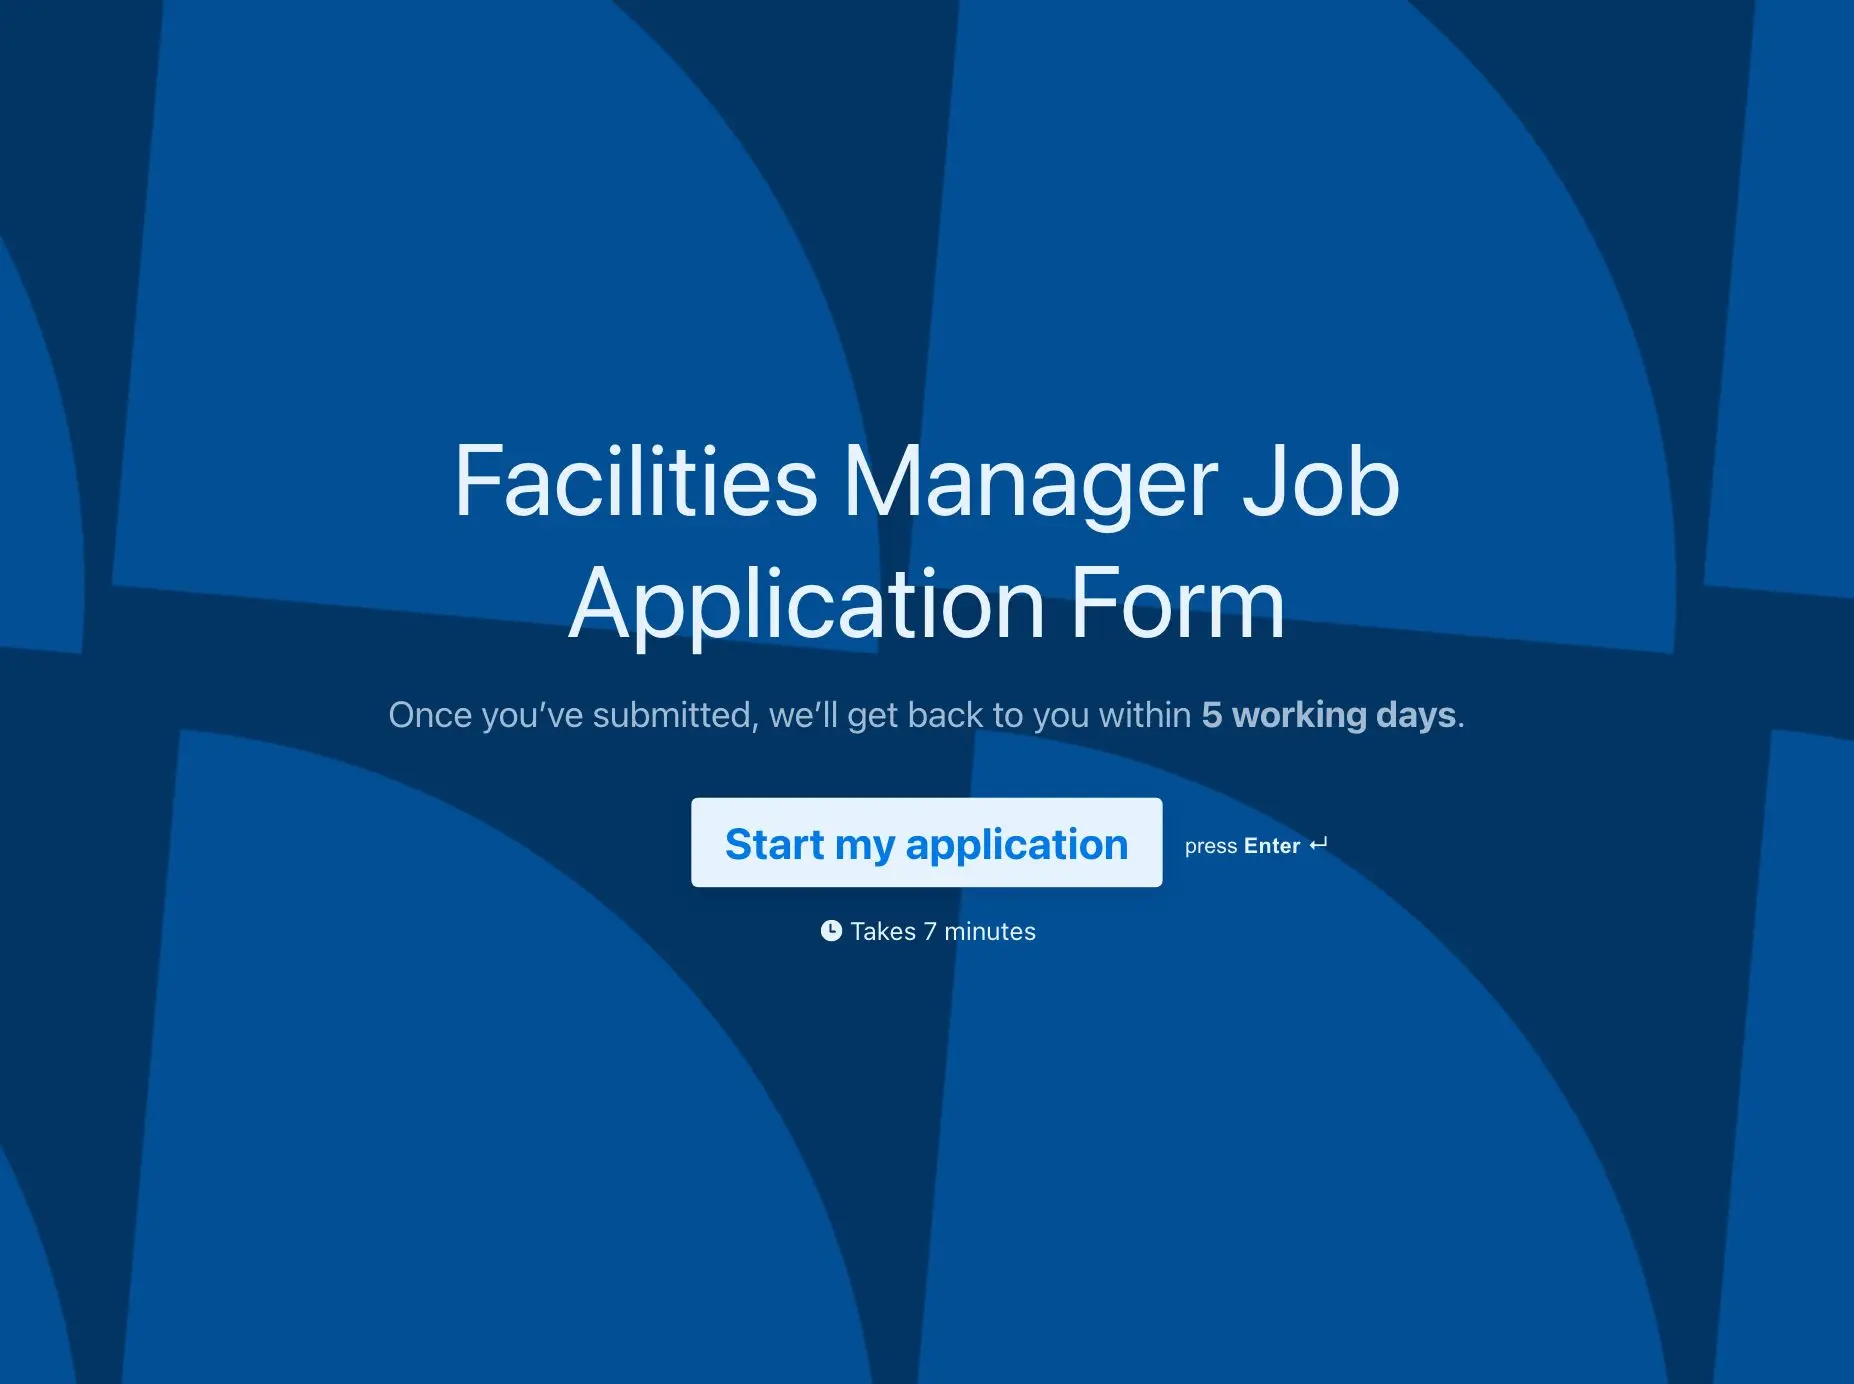 Facilities Manager Job Application Form Template Hero